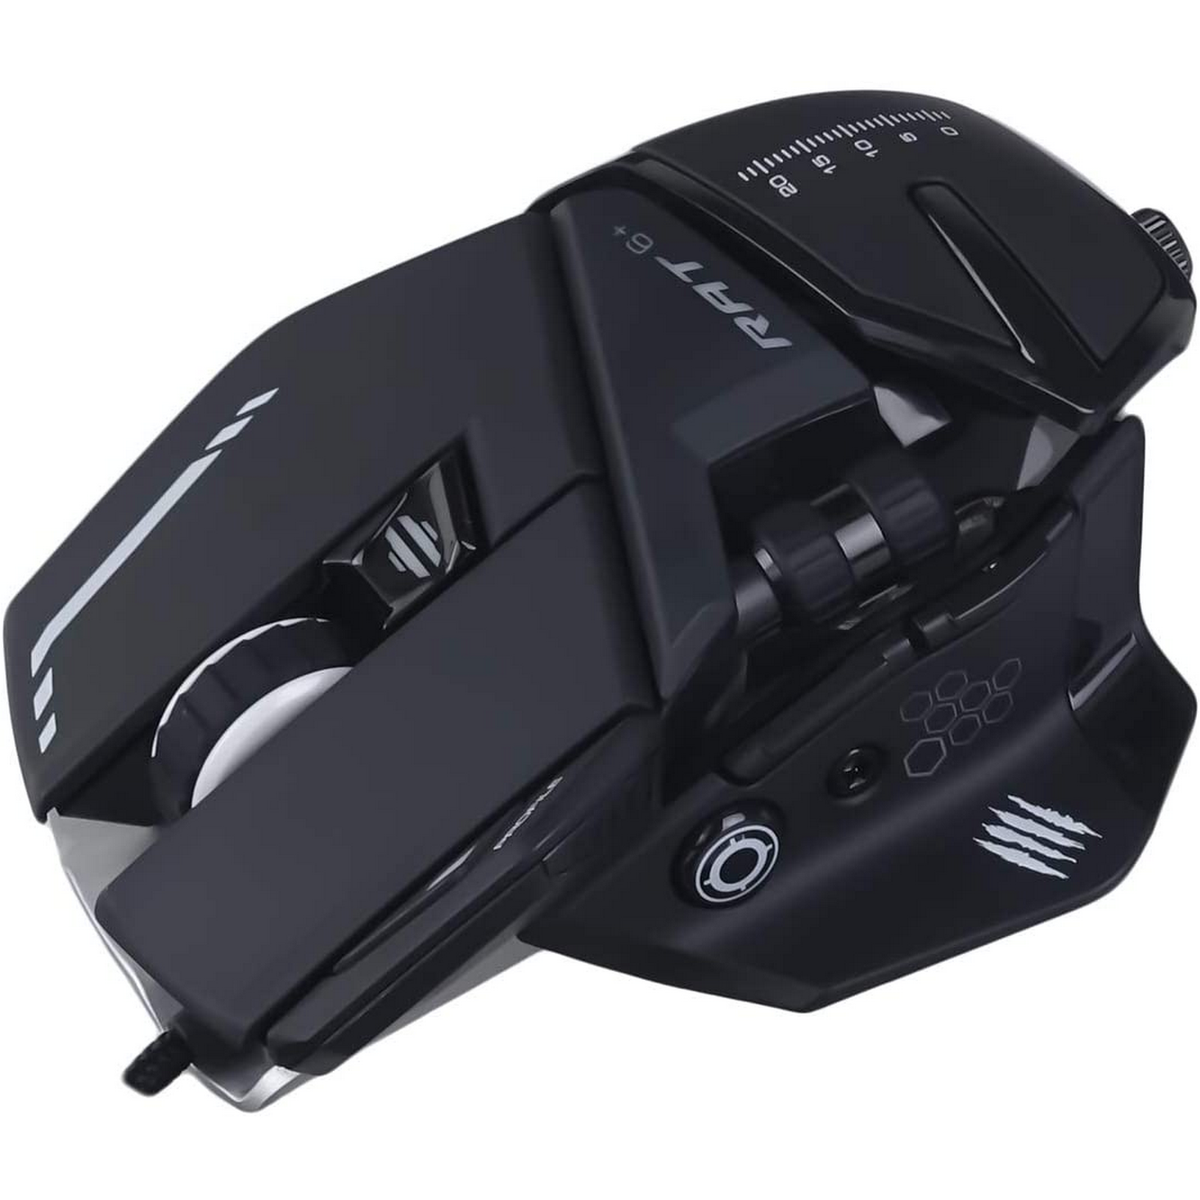 MAD CATZ MR04DCINBL000-0 6+ Schwarz OPTICAL R.A.T. Maus, MOUSE, BL GAMING Gaming